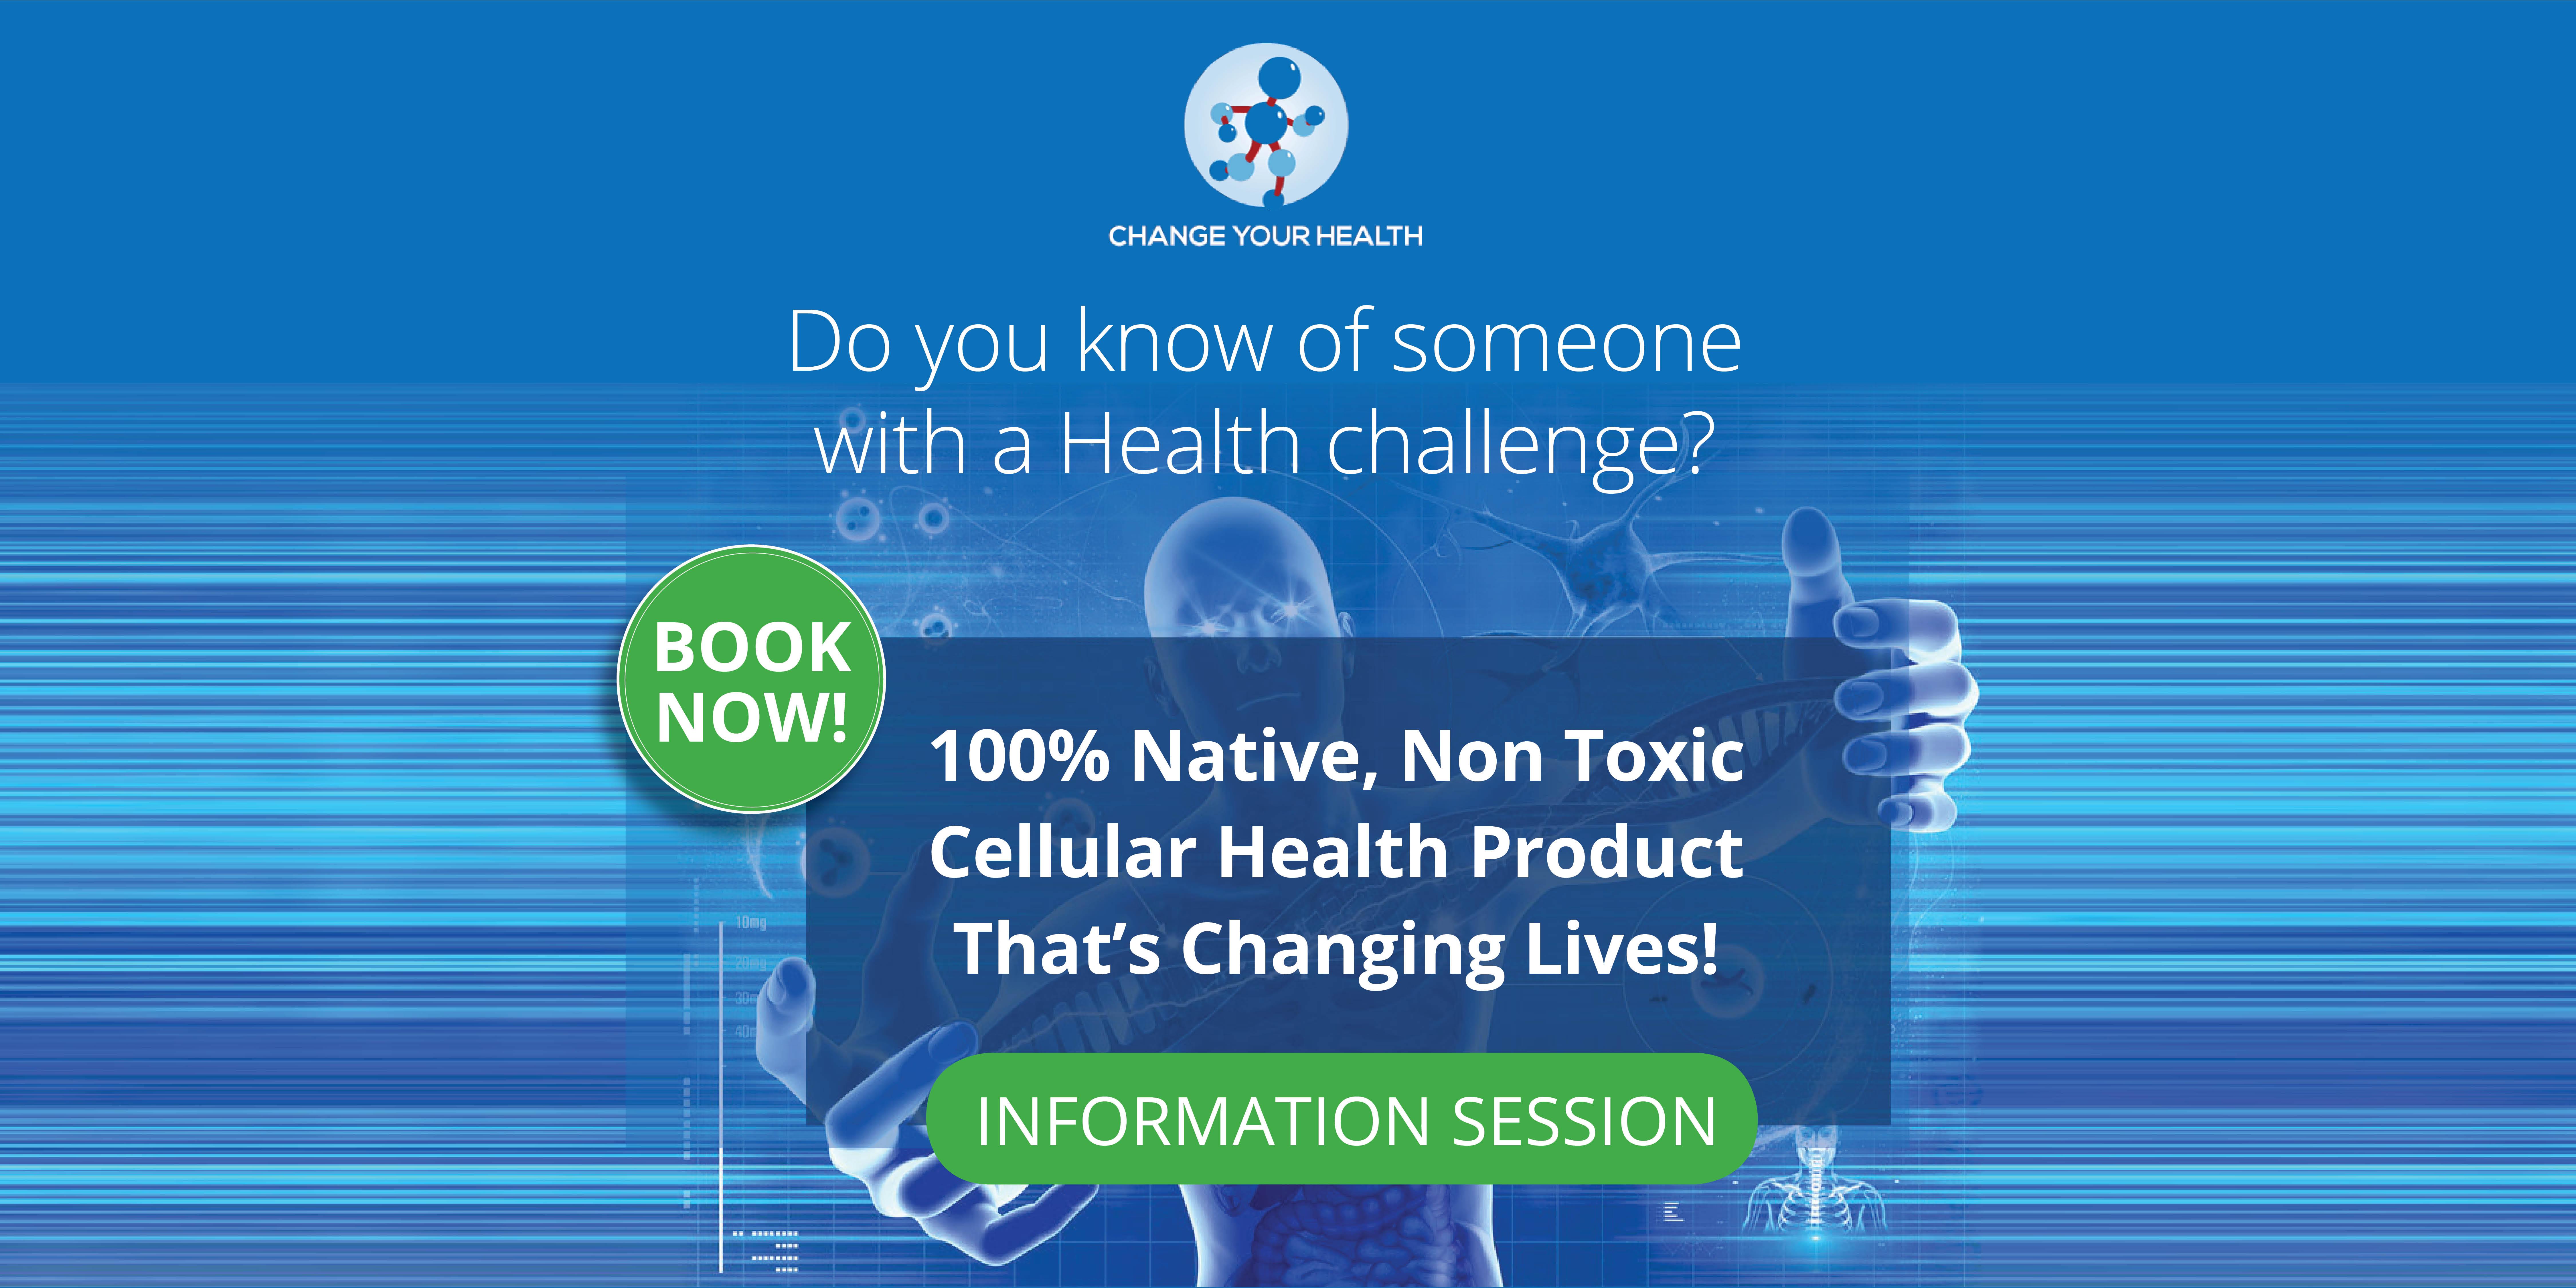 Discover Redox Molecules with Change Your Health - ASEA